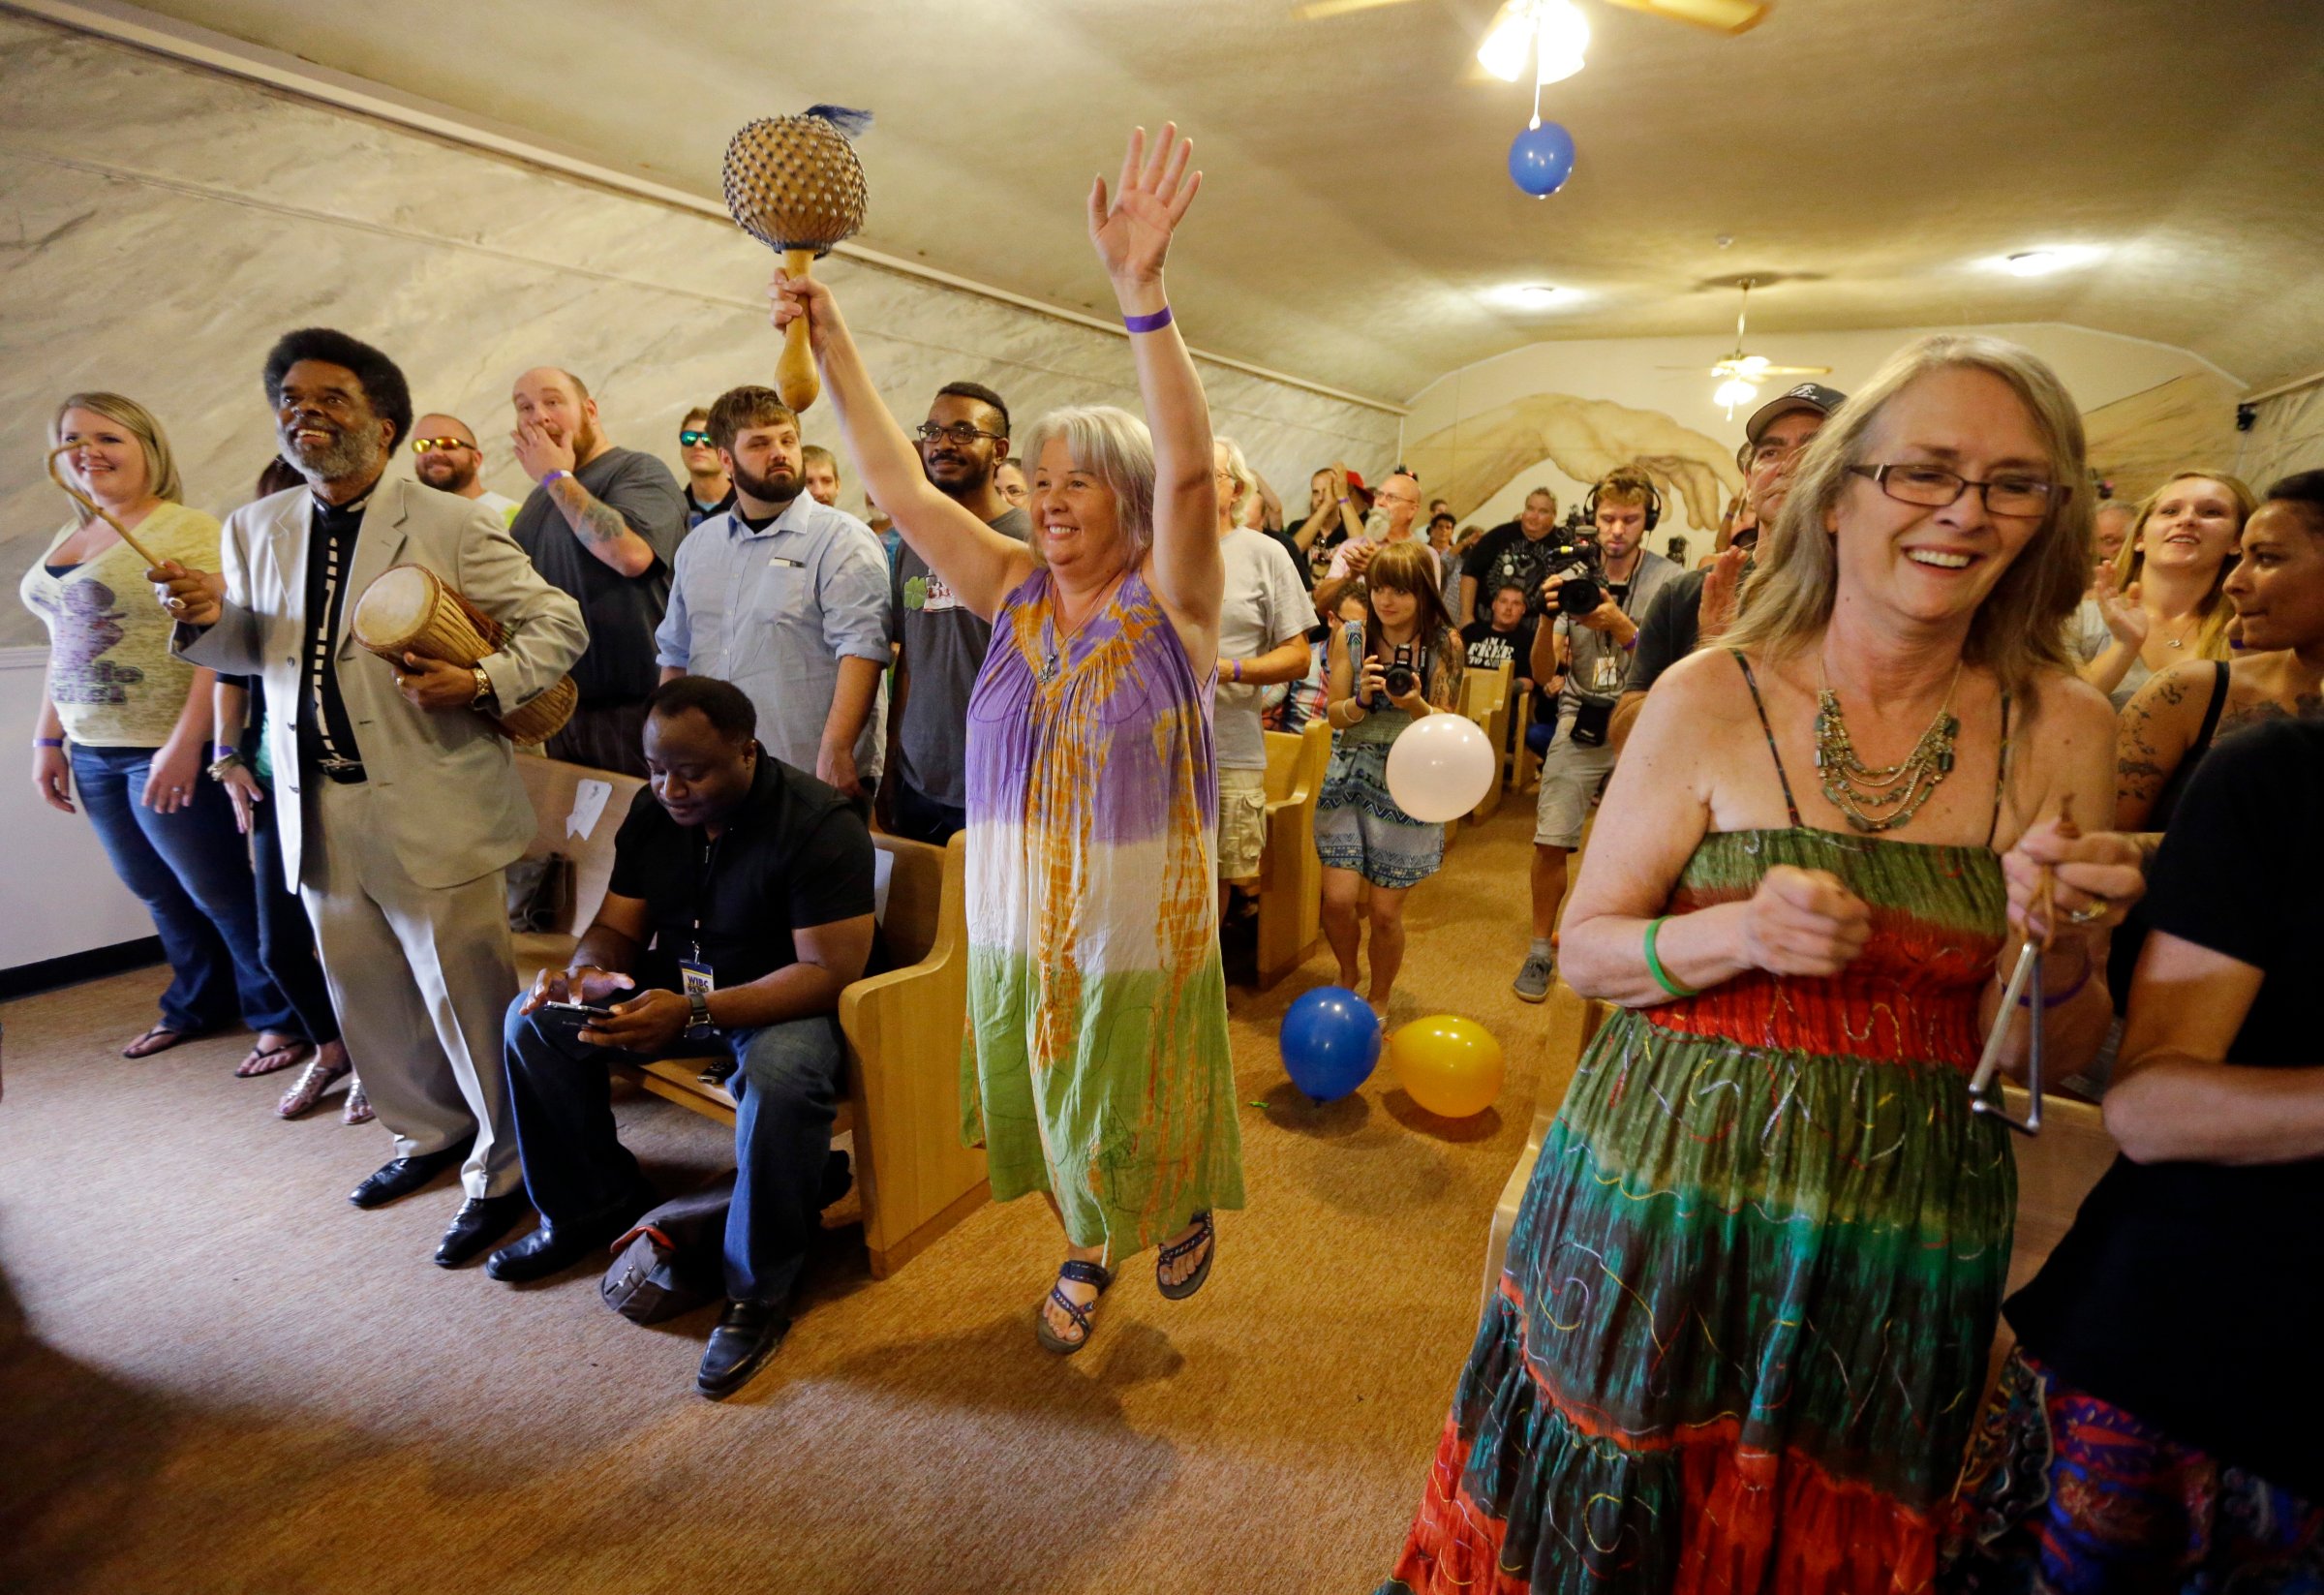 Members of the congregation at the First Church of Cannabis sing and dance during the church's first service on July 1, 2015, in Indianapolis.